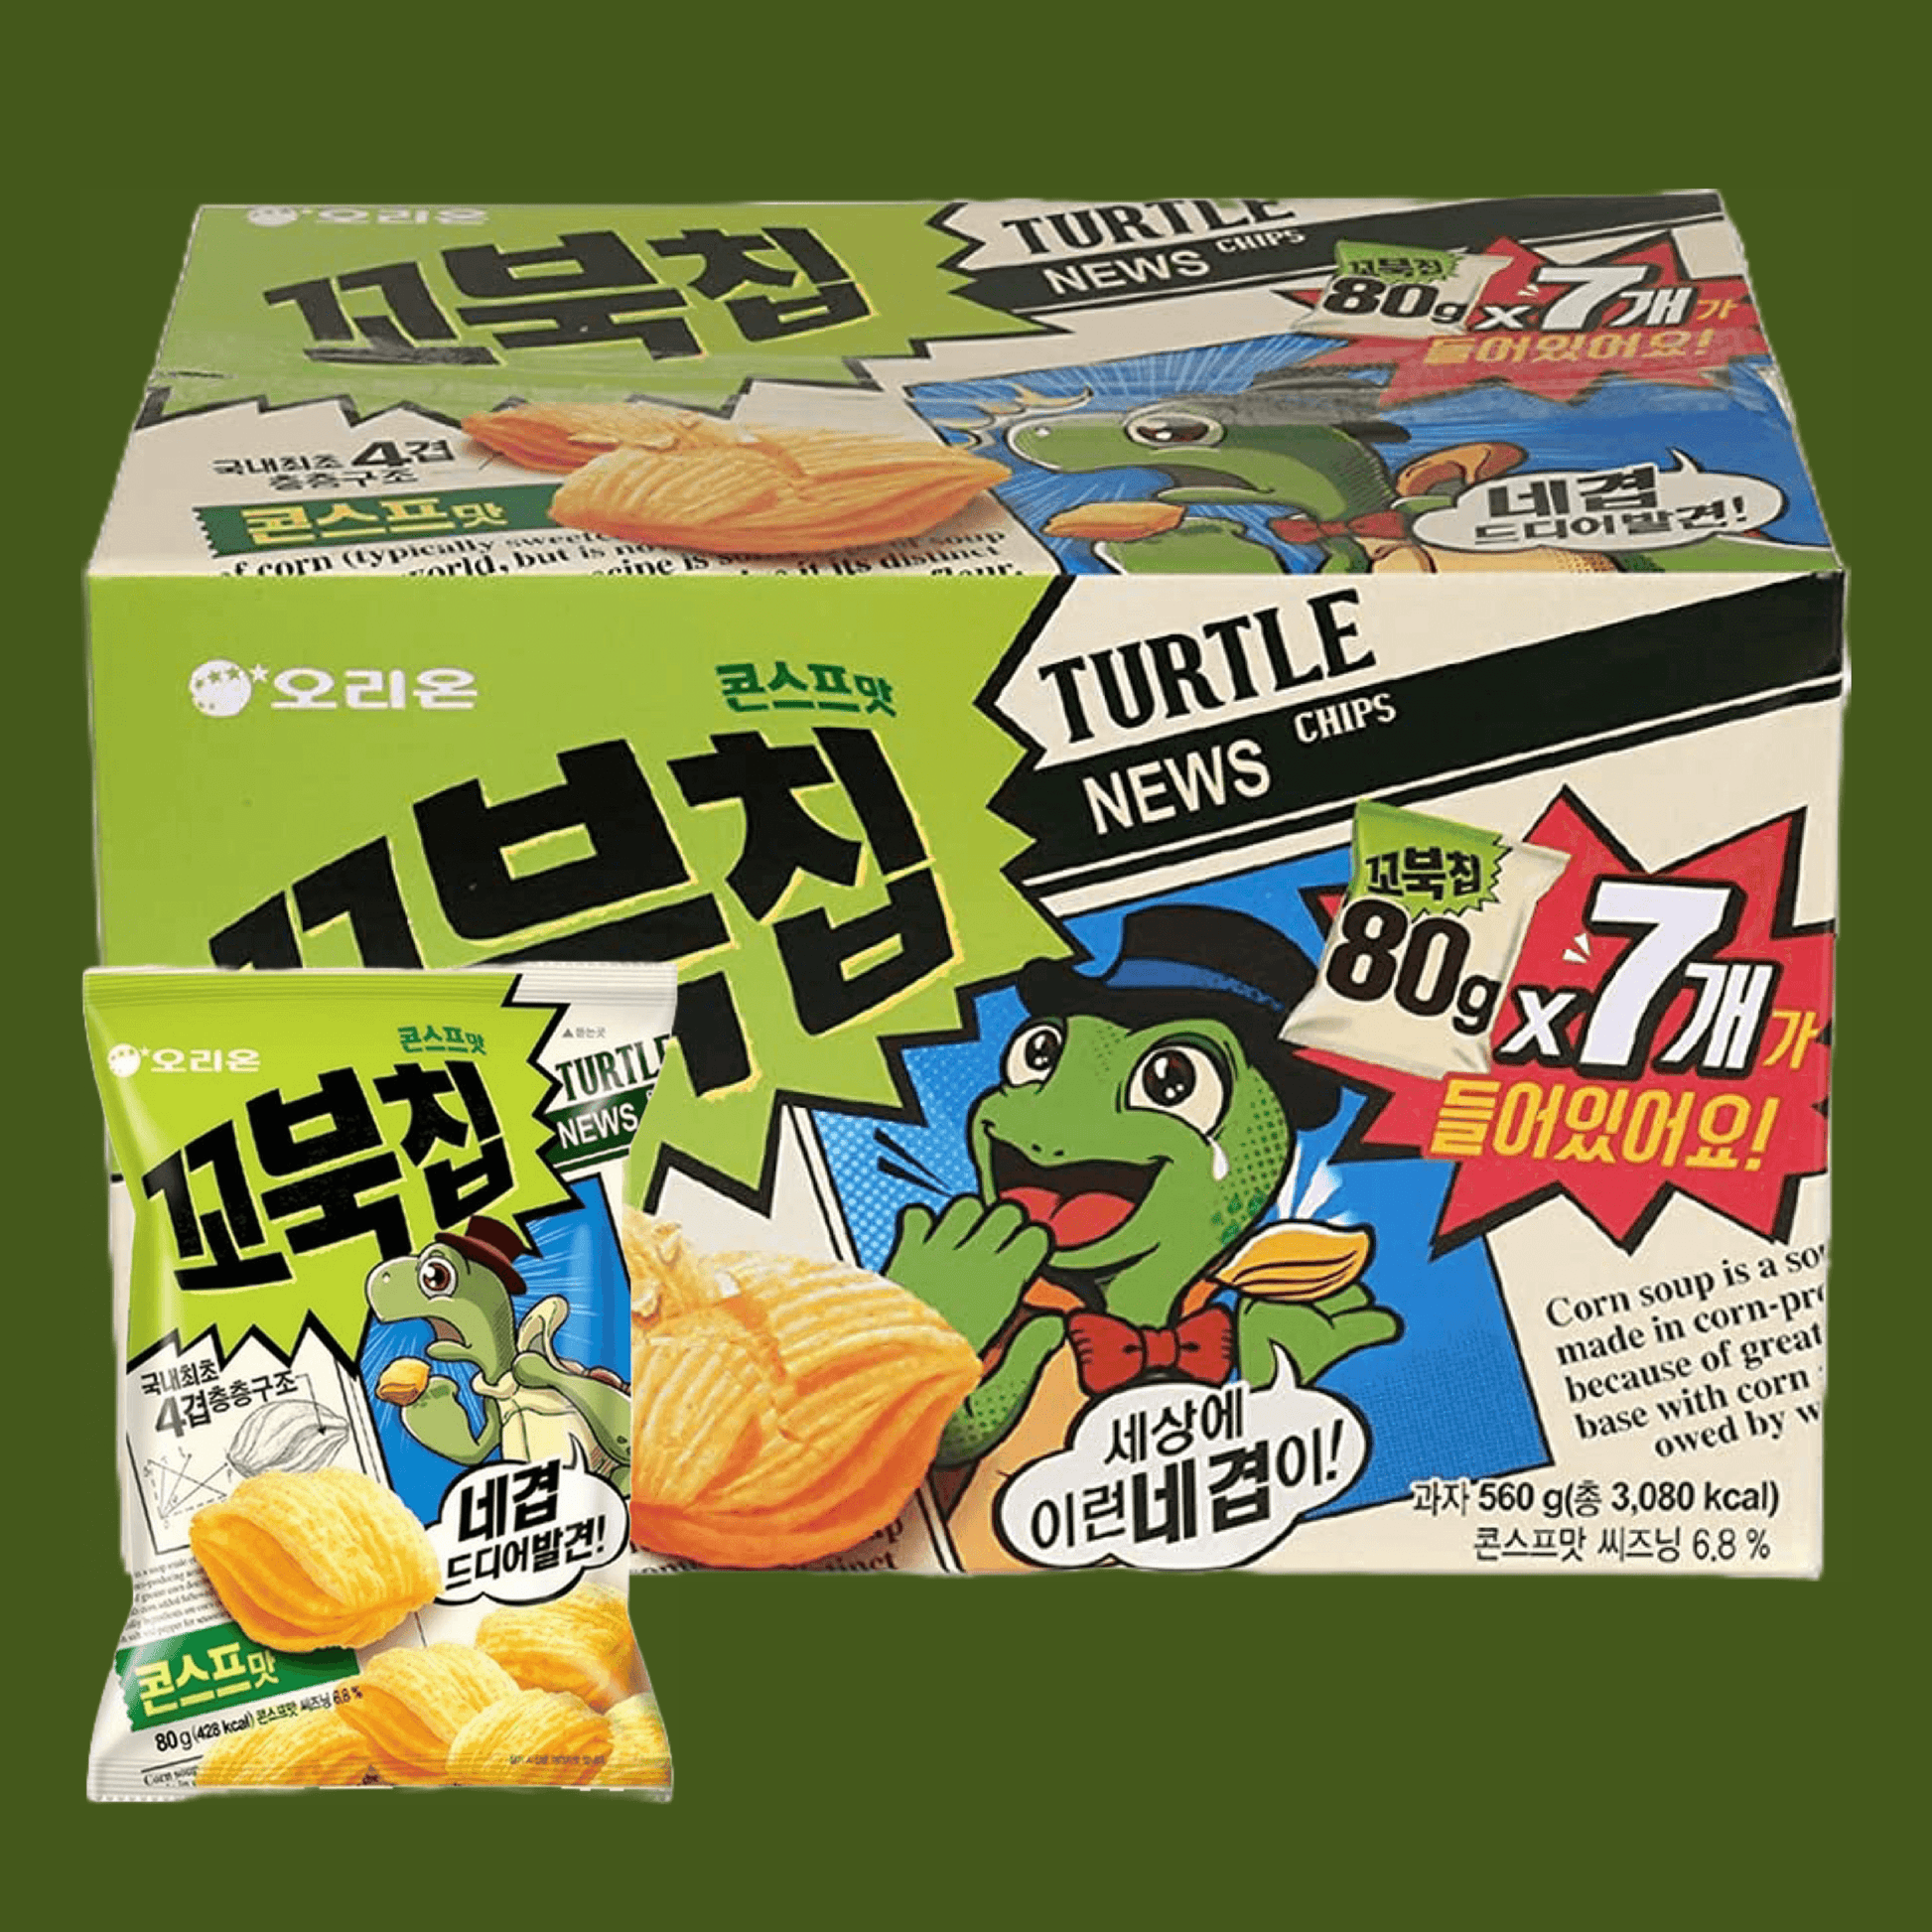 Orion Turtle Chips Sweet Corn 80G 7 Pack - The Snacks Box - Asian Snacks Store - The Snacks Box - Korean Snack - Japanese Snack